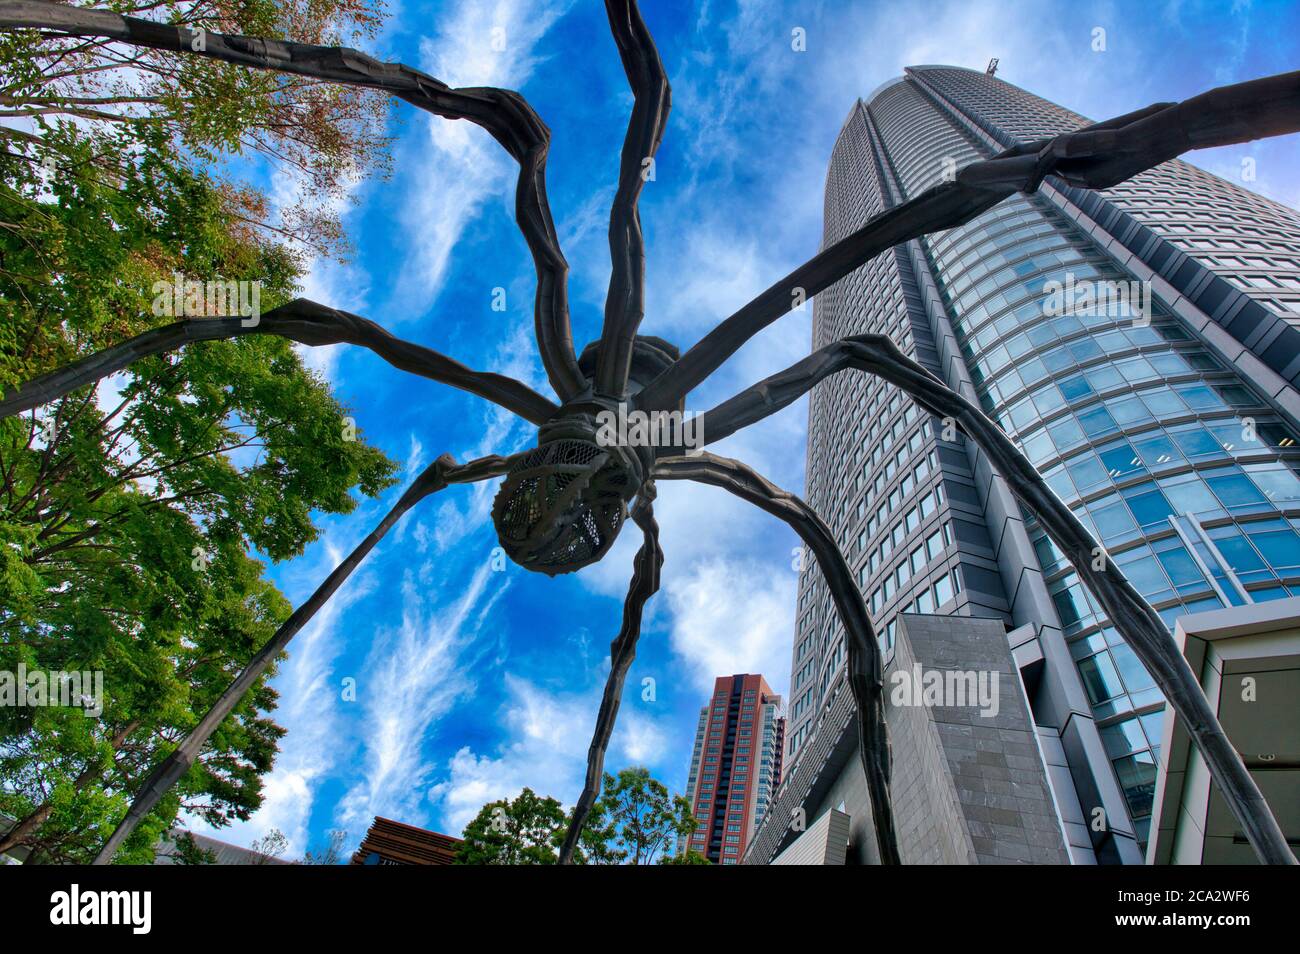 Roppongi Hills Mori Tower, Spider of Louise Bourgeois, Tokyo, Giappone Foto Stock